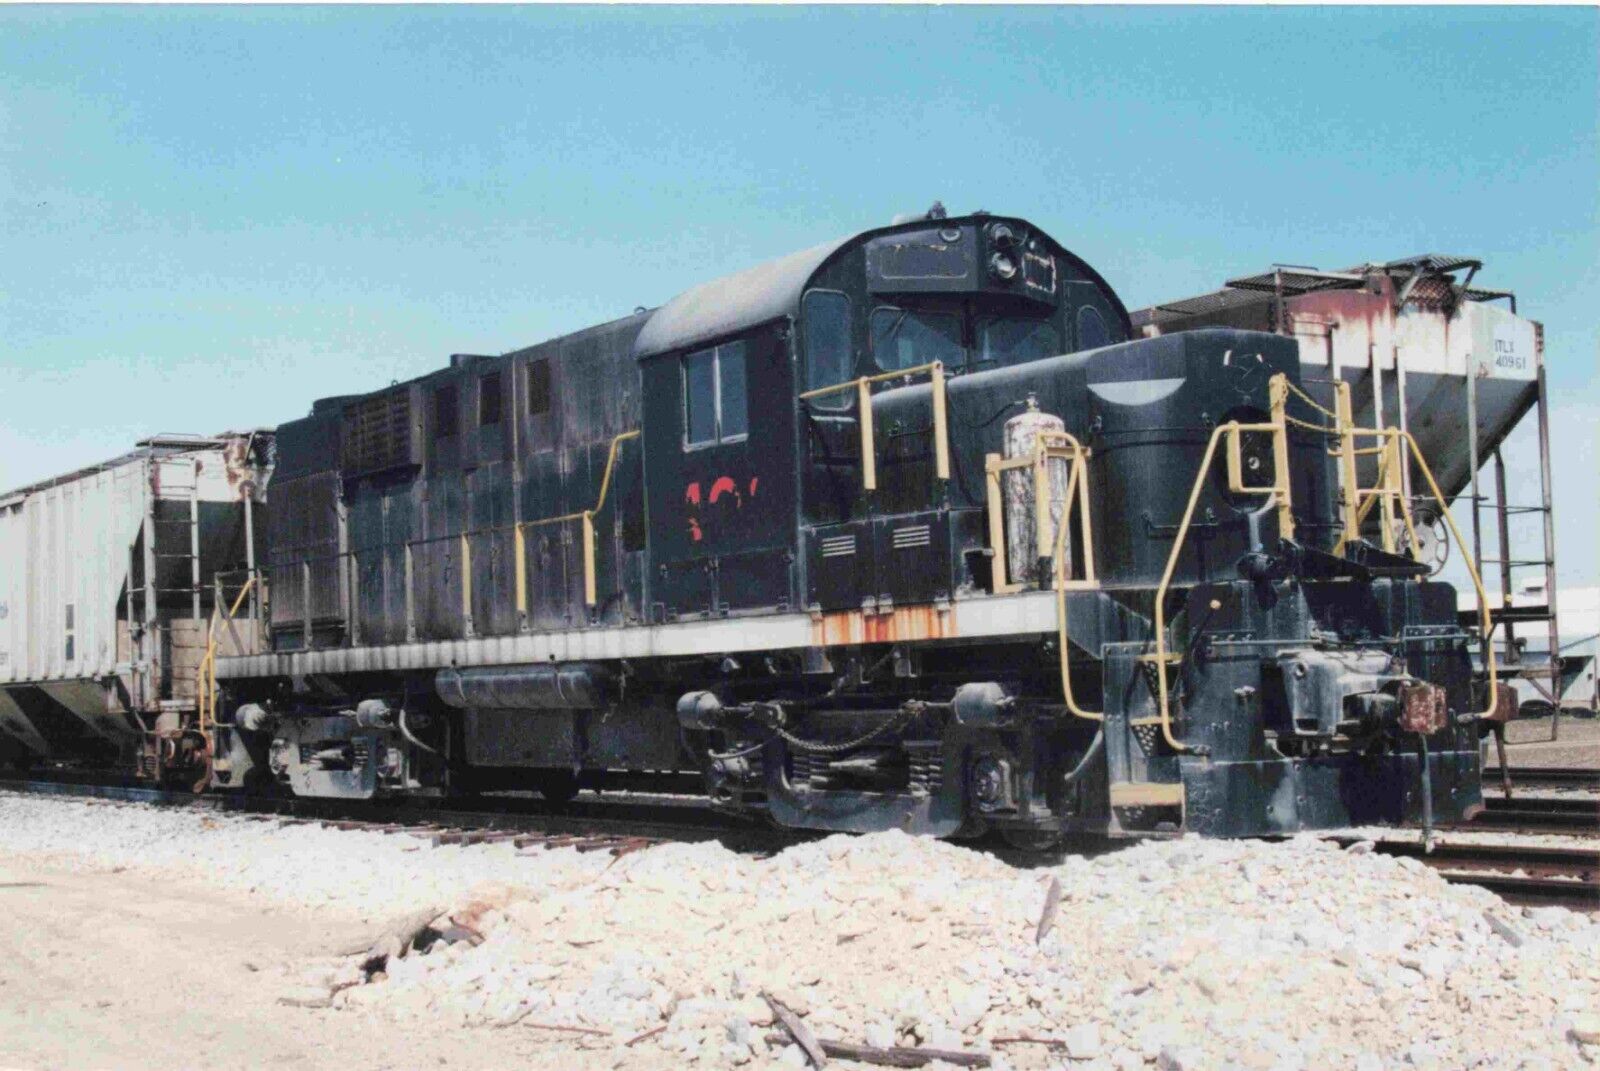 Rs11 Consolidated Grain & Barge Naples Illinois Switcher Train Photo 4X6 #254